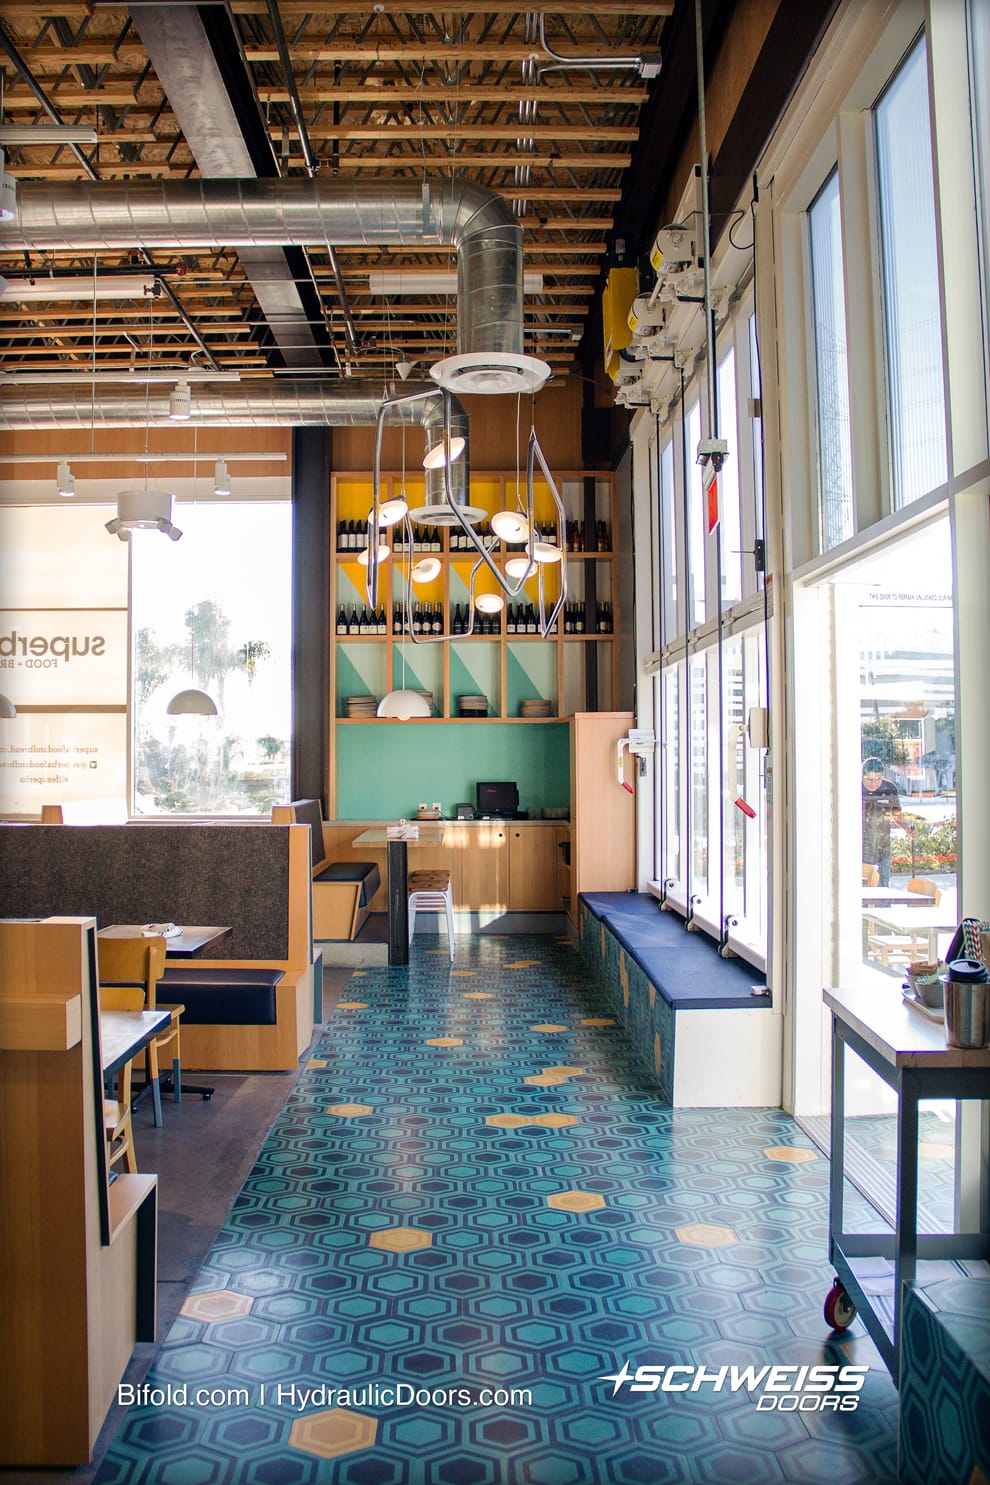 Bifold clearance works with lighting and ducts at El Segundo Restaurant